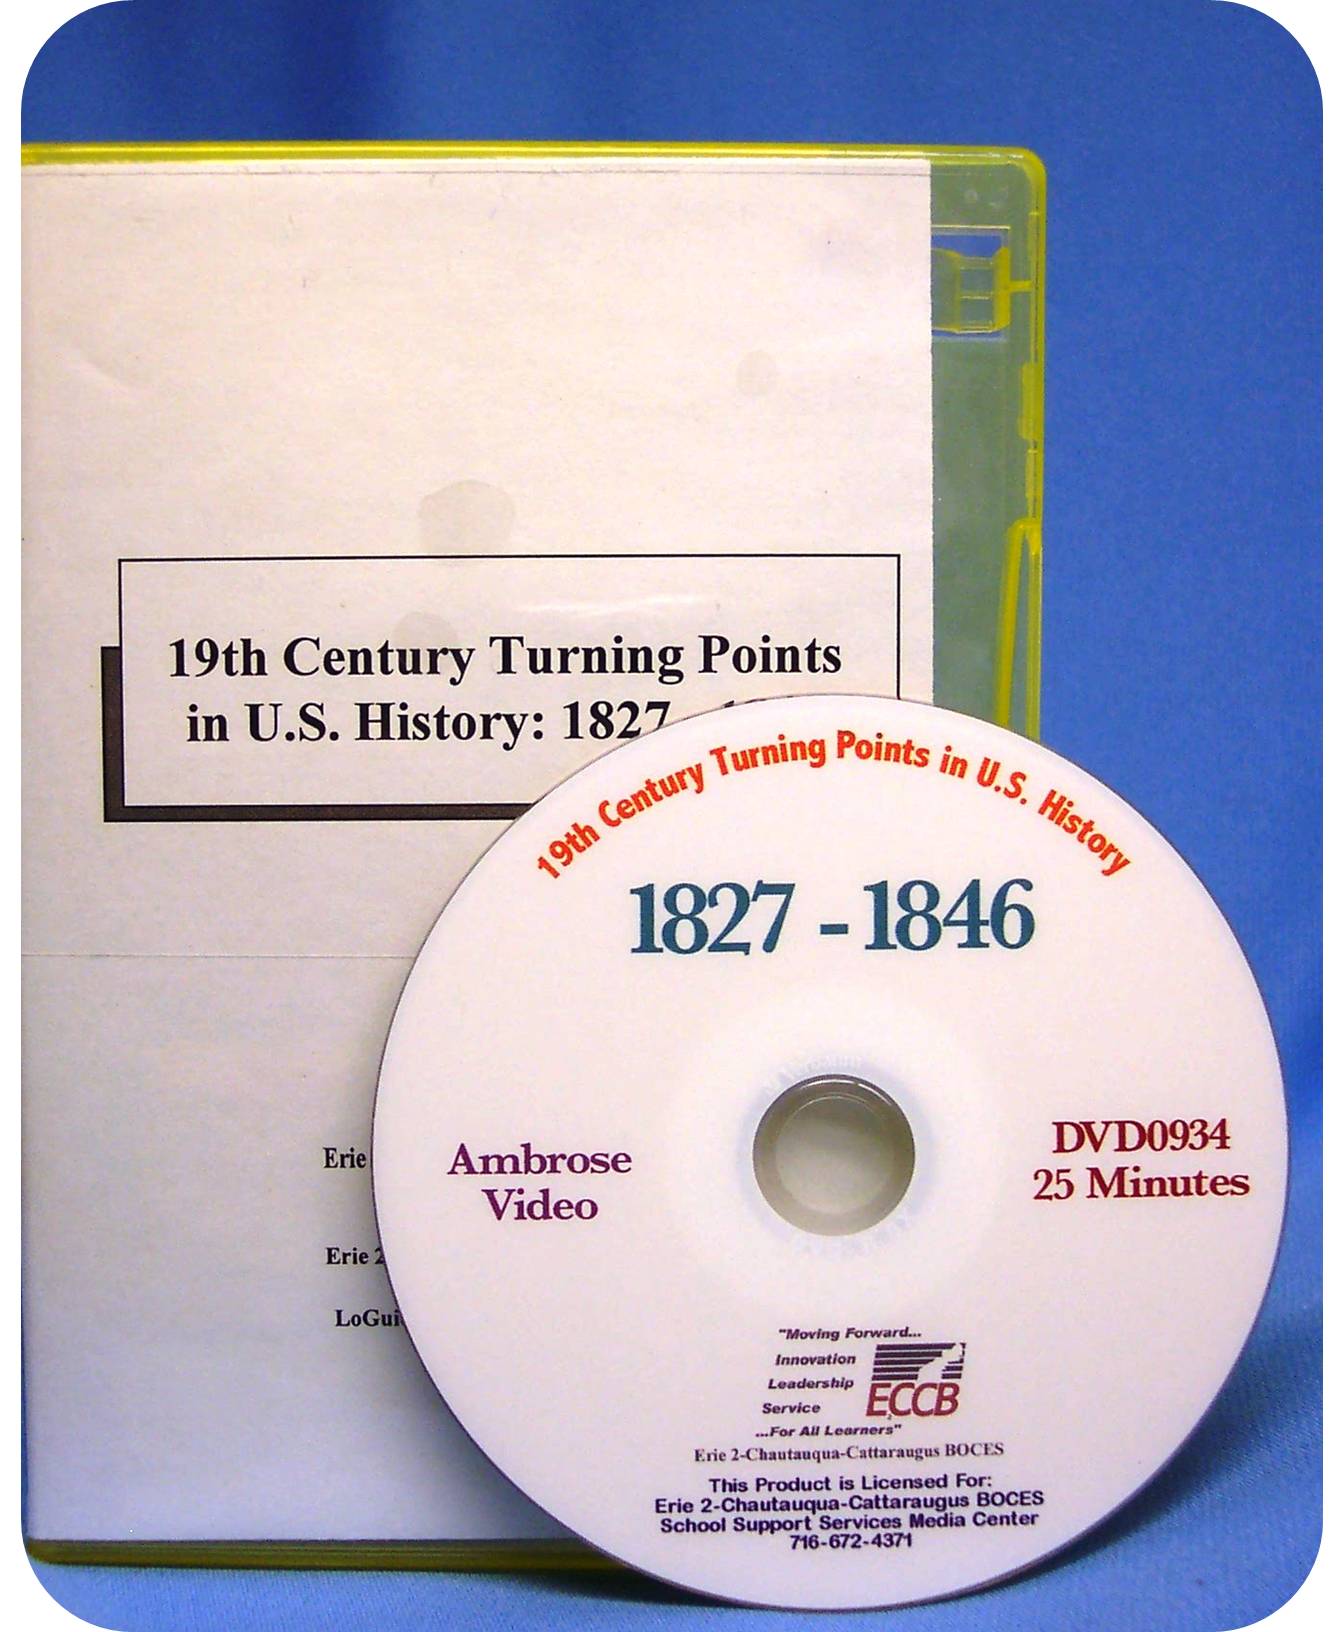 19th Century Turning Points in U.S. History: 1827 - 1846